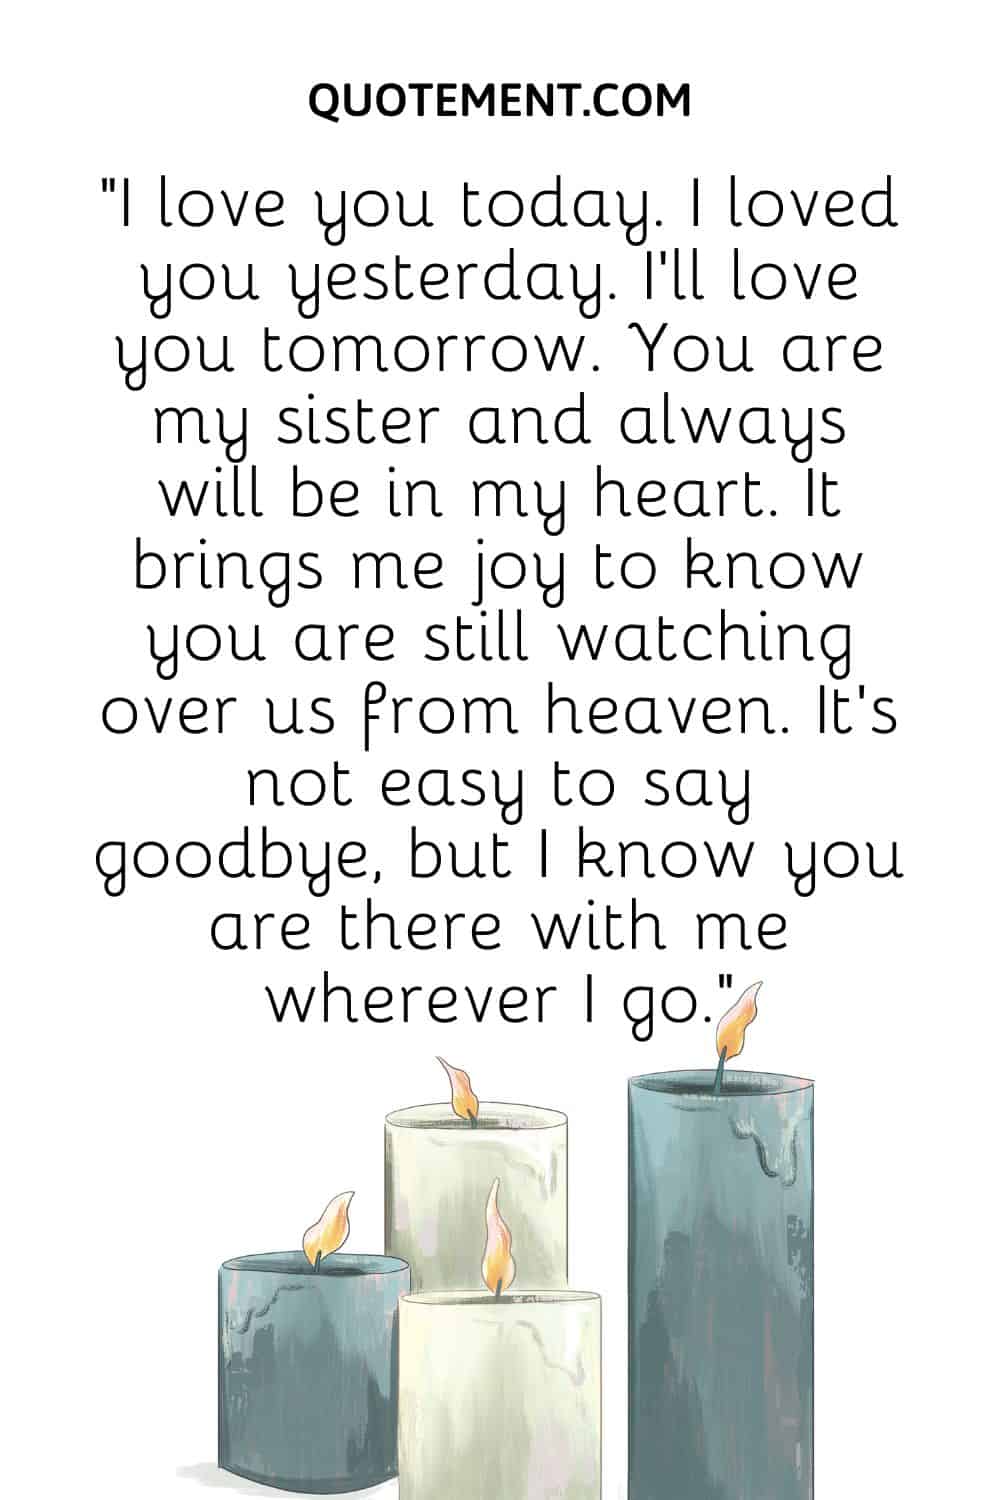 “I love you today. I loved you yesterday. I’ll love you tomorrow. You are my sister and always will be in my heart.